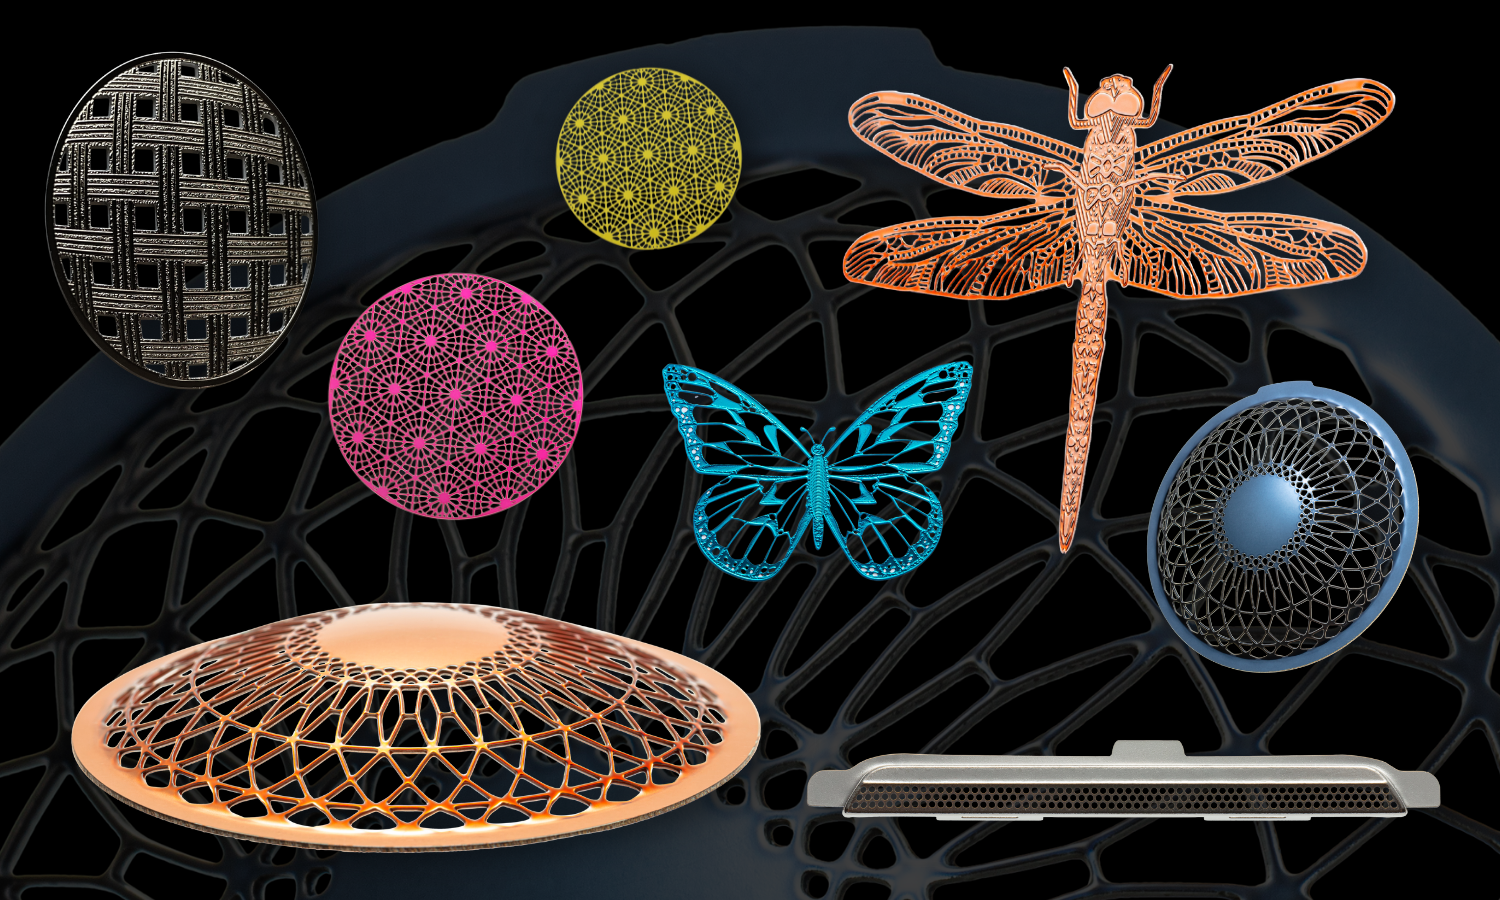 collage of circular parts with cut out patterns - various sizes of circles with different geometric patterns cut out leaving some spaces open. hot pink, neon green, dark gray; rose gold, midnight blue circle pieces with curved surfaces and through holes. a rose gold dragonfly with openings on the wings; a metallic blue butterfly with openings on the wings.